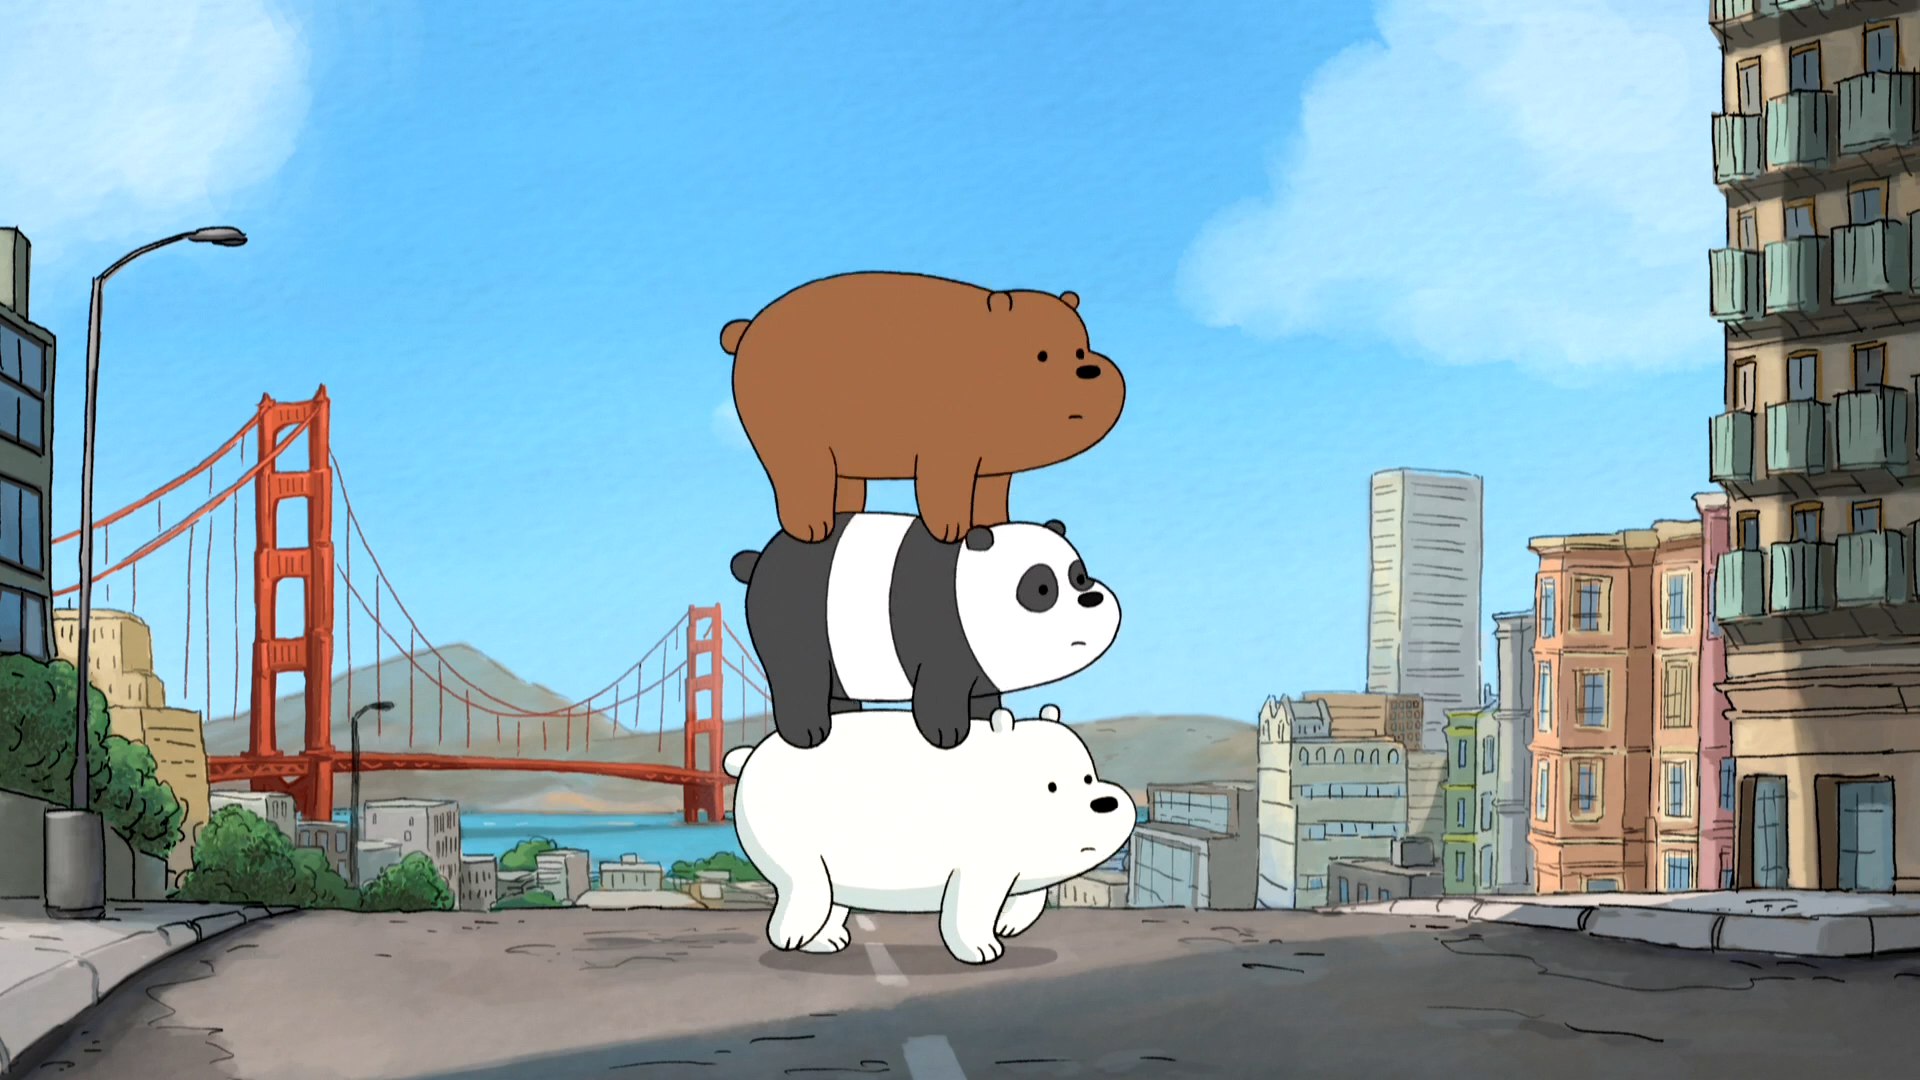 We Bare Bears wallpaper ① Download free cool wallpapers for desktop  mobile laptop in any res  We bare bears wallpapers Bear wallpaper Cool  desktop wallpapers